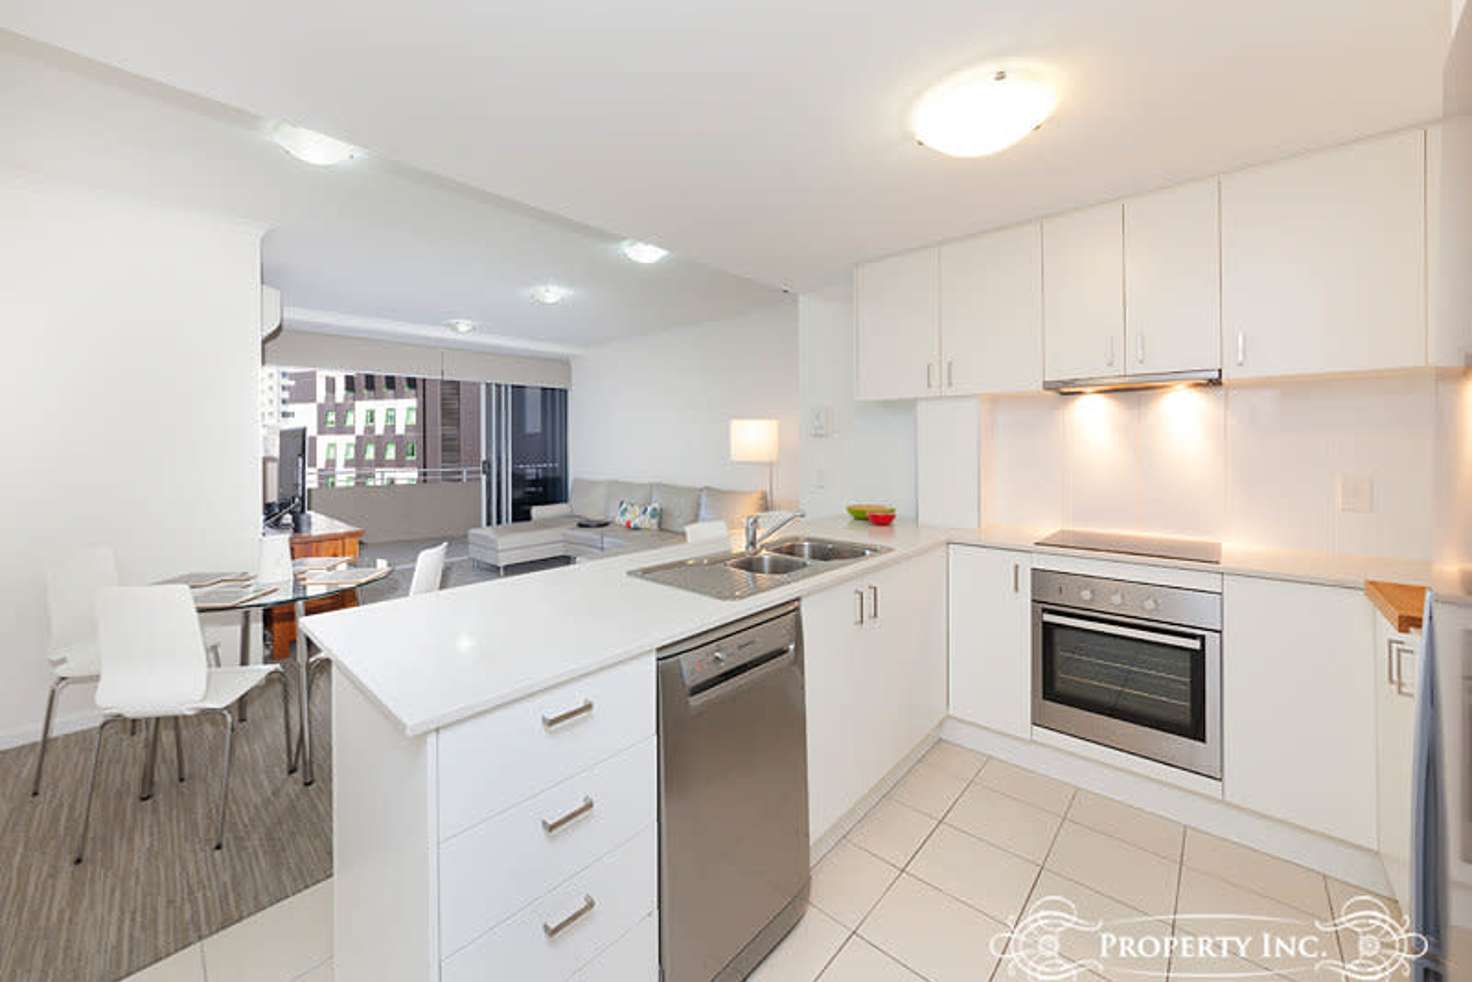 Main view of Homely unit listing, 22/128 Merivale Street, South Brisbane QLD 4101